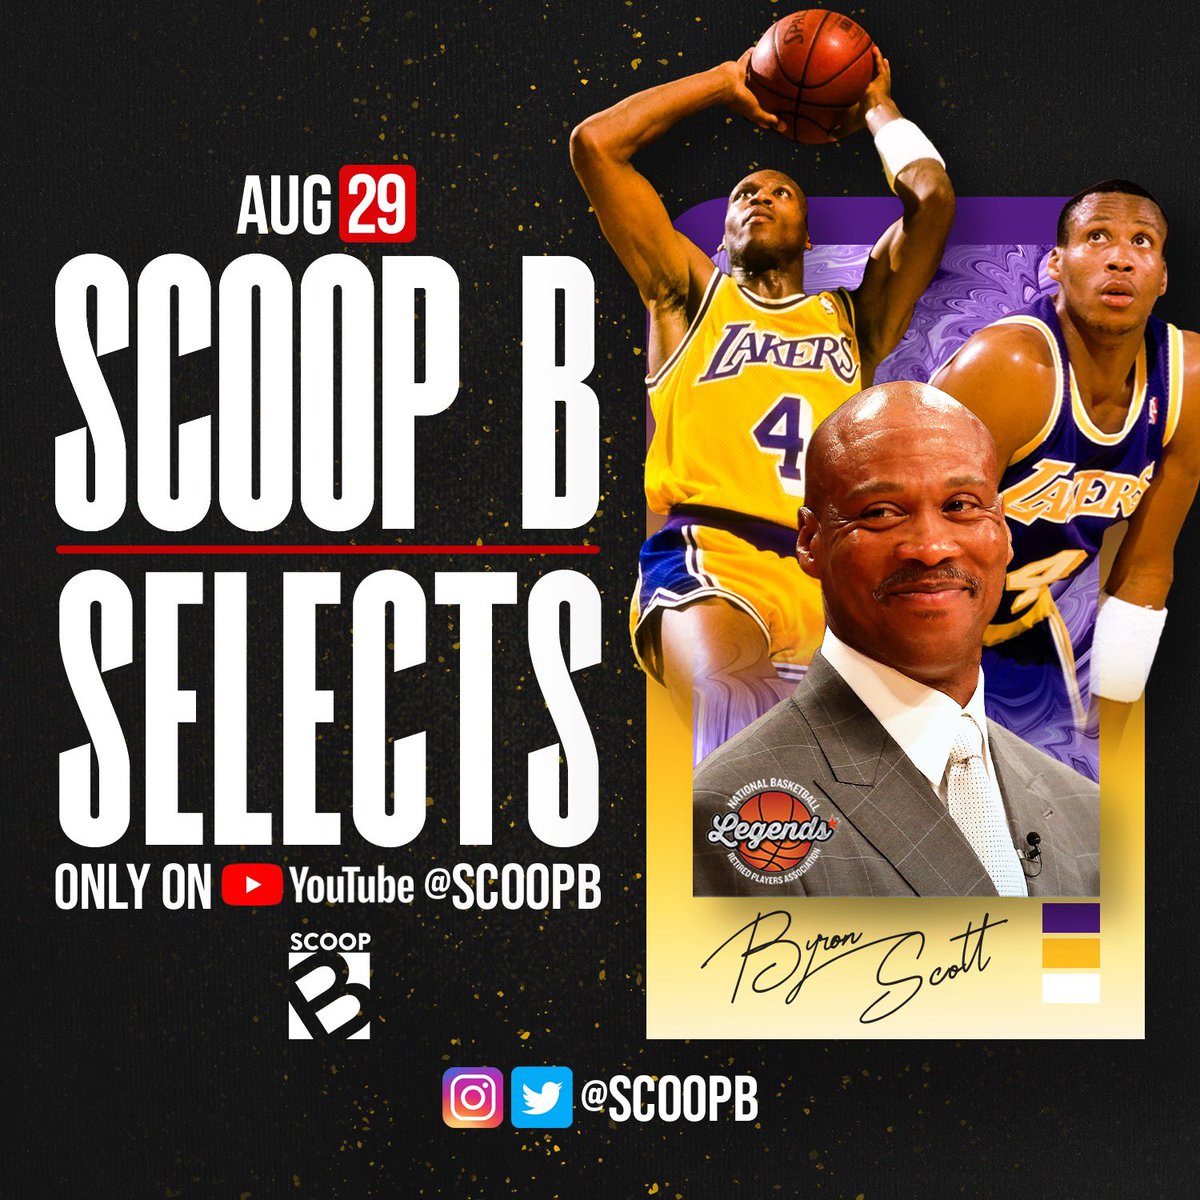 Lakers fans & Nets fans will both love this episode of Scoop B Selects! Byron Scott drops by today! Full Episode With @NBAalumni @official_bscott Here ➡️ youtu.be/8CTVLw62eNk?si…